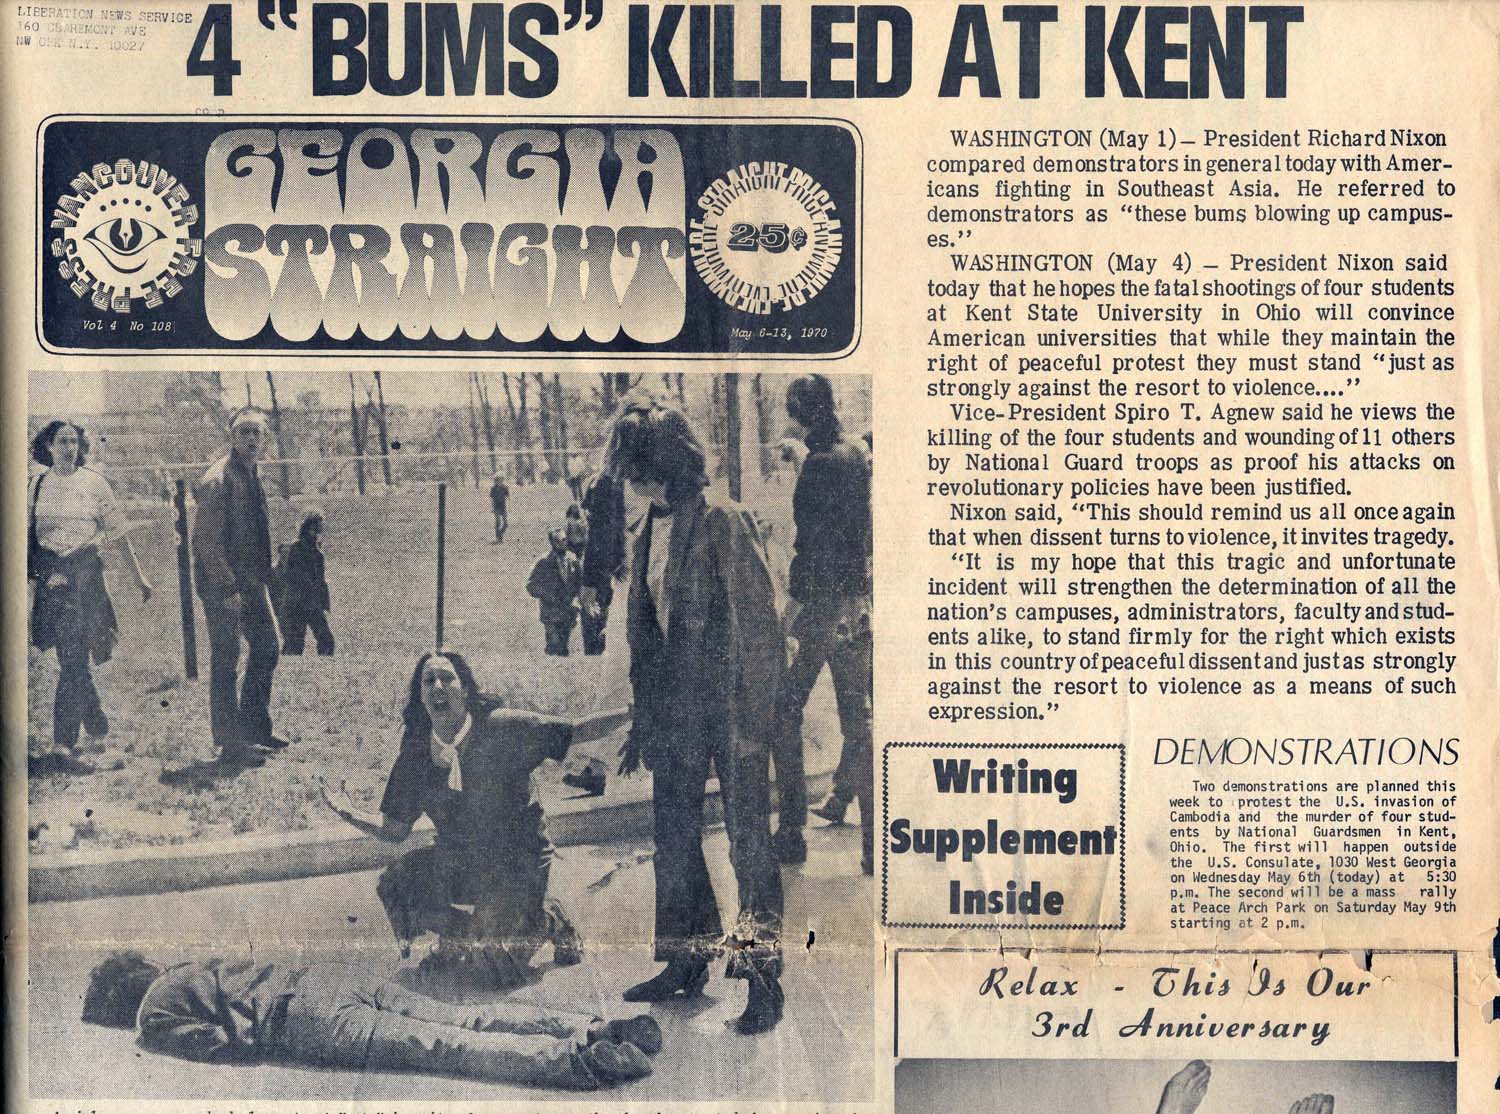 Remembering Kent State May 4, 1970 Archives and Special Collections Blog